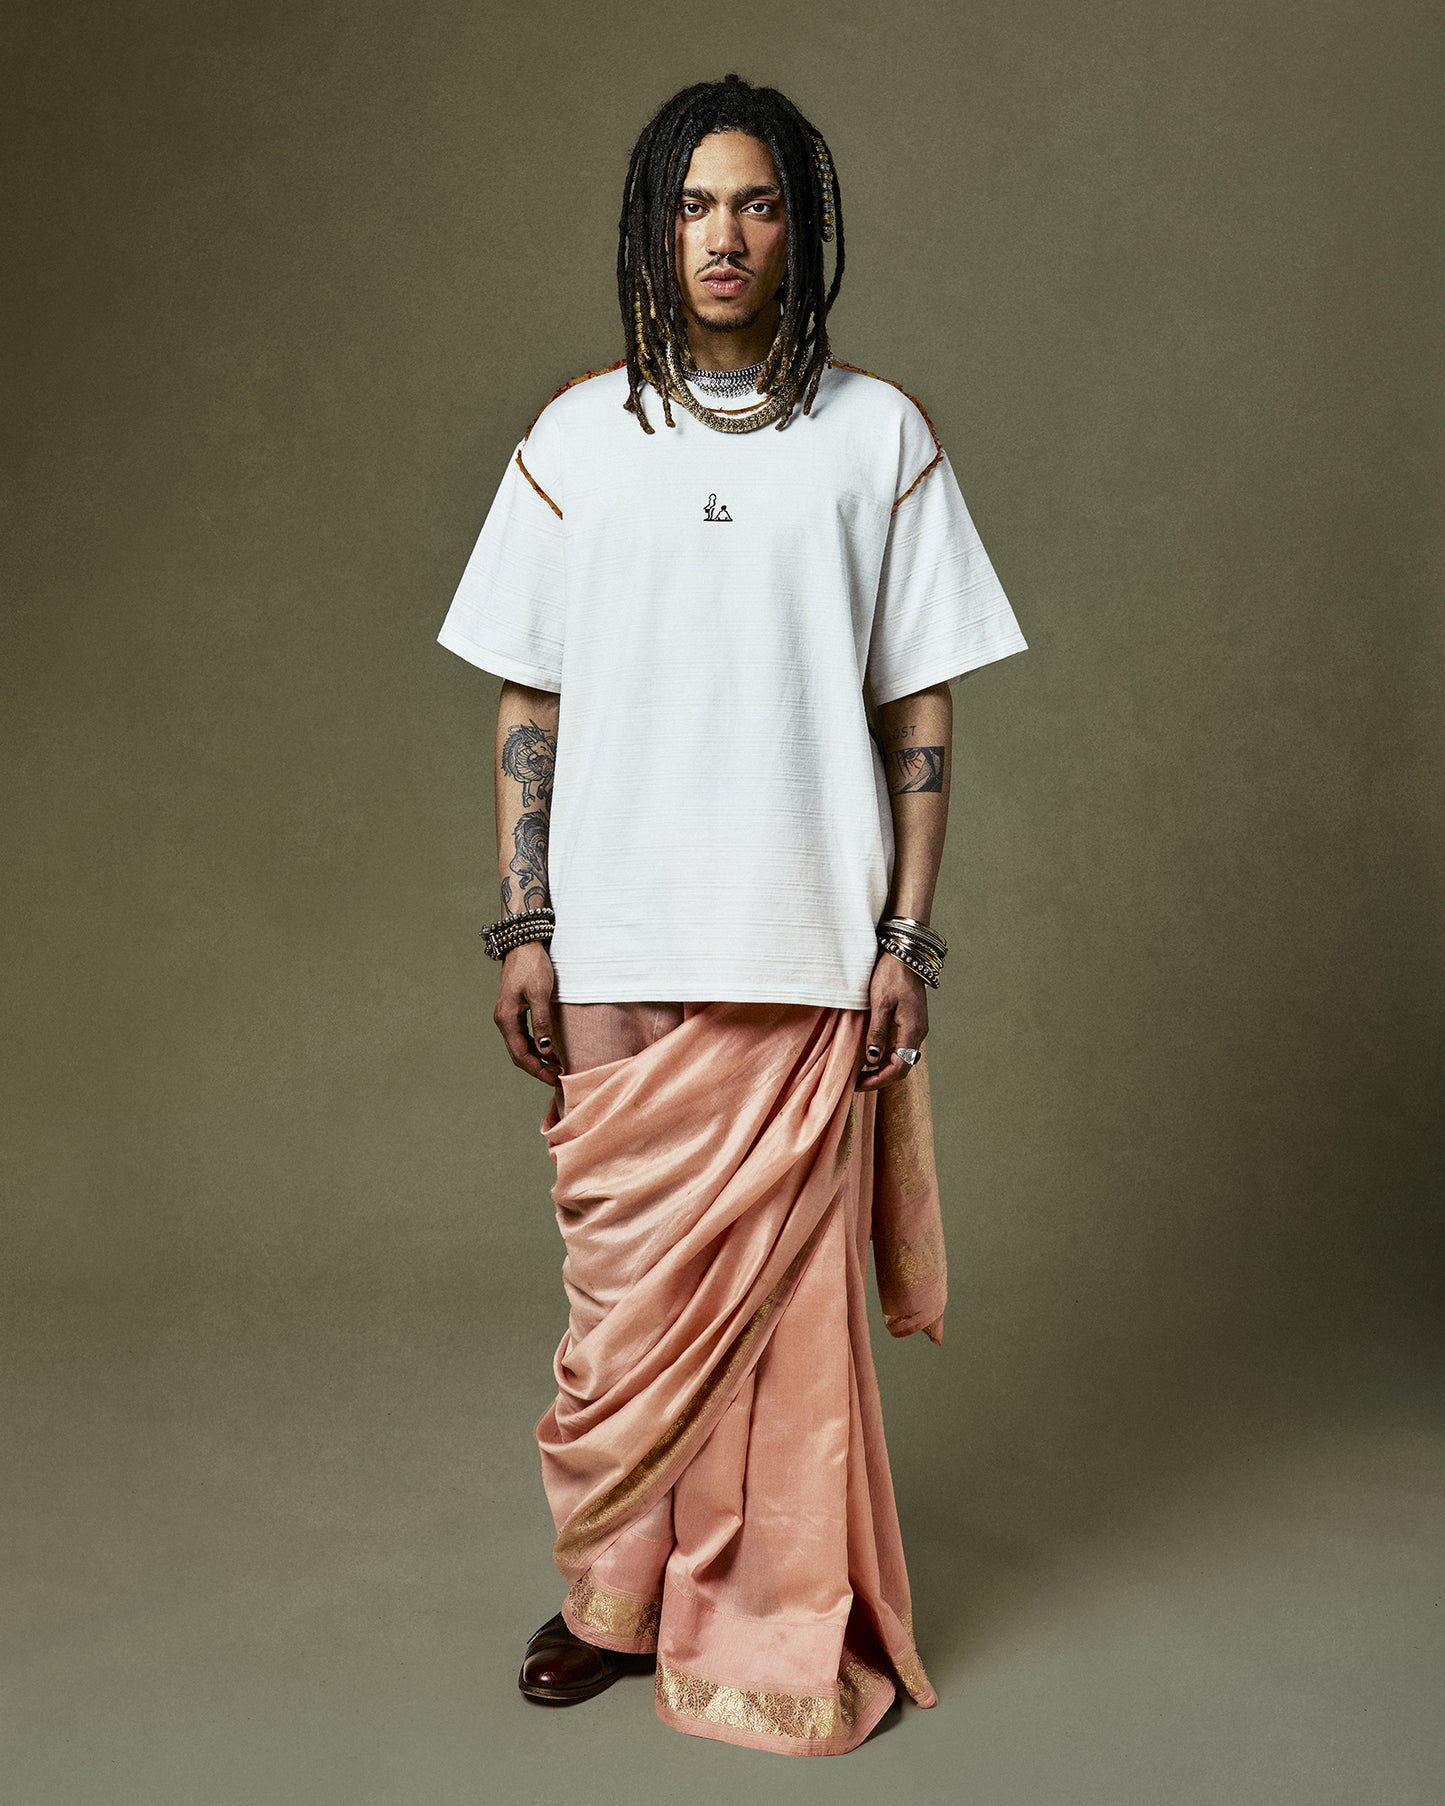 Quinto T-Shirt symbolizing the fusion of heritage and style, featuring a 'Calabria-Sicilia' narrative, saree seam detailing, and a classic ribbed crew neck.